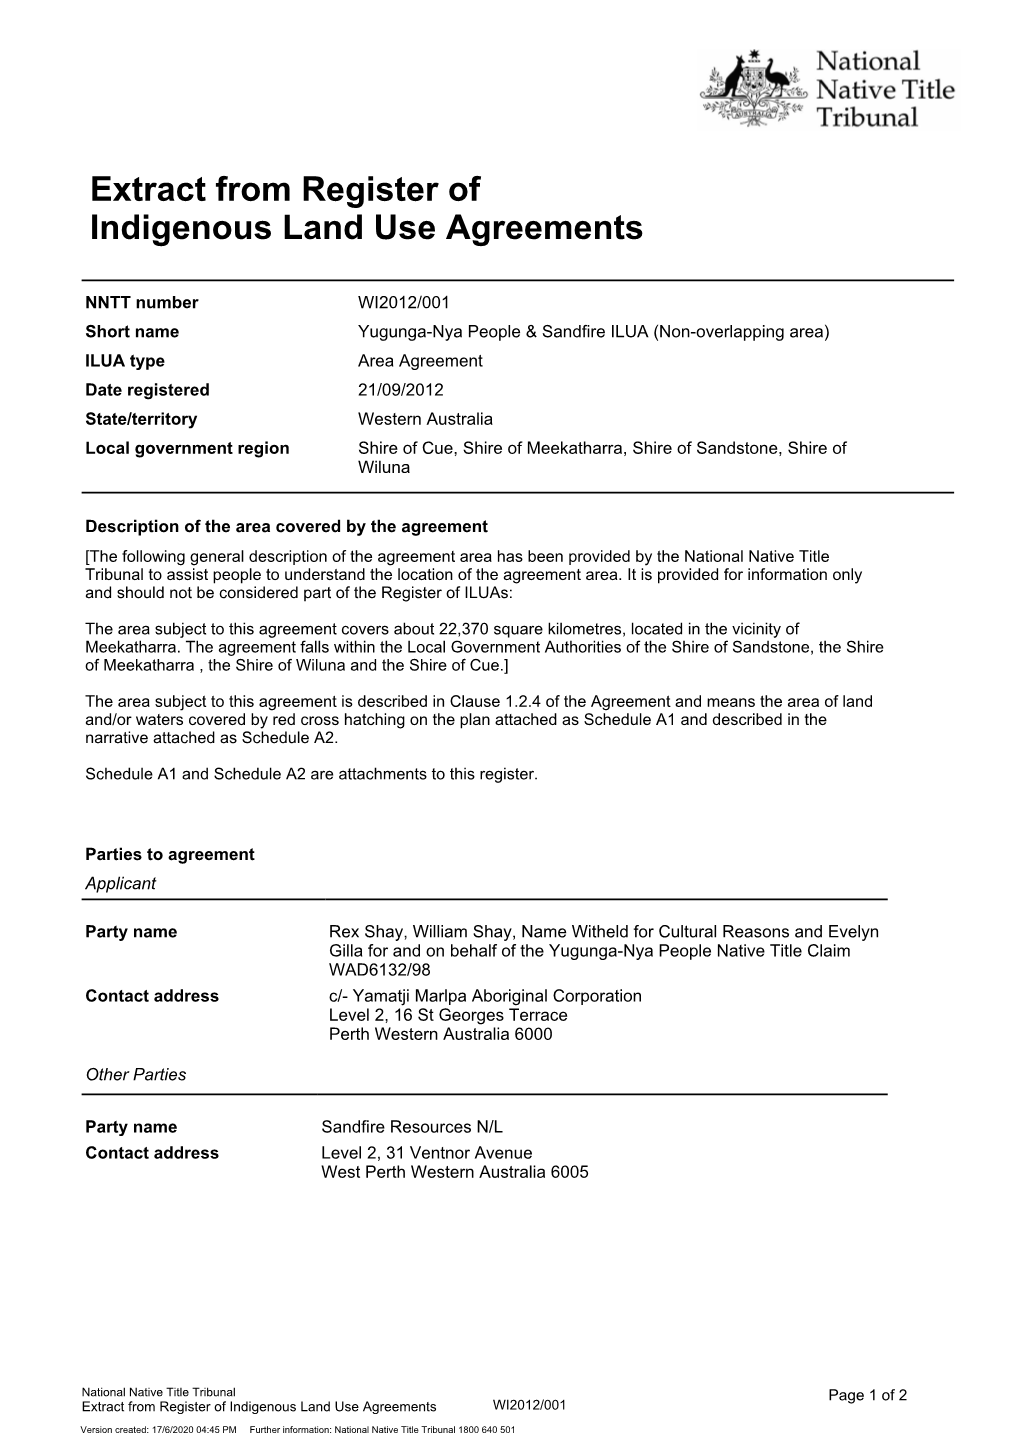 Extract from Register of Indigenous Land Use Agreements